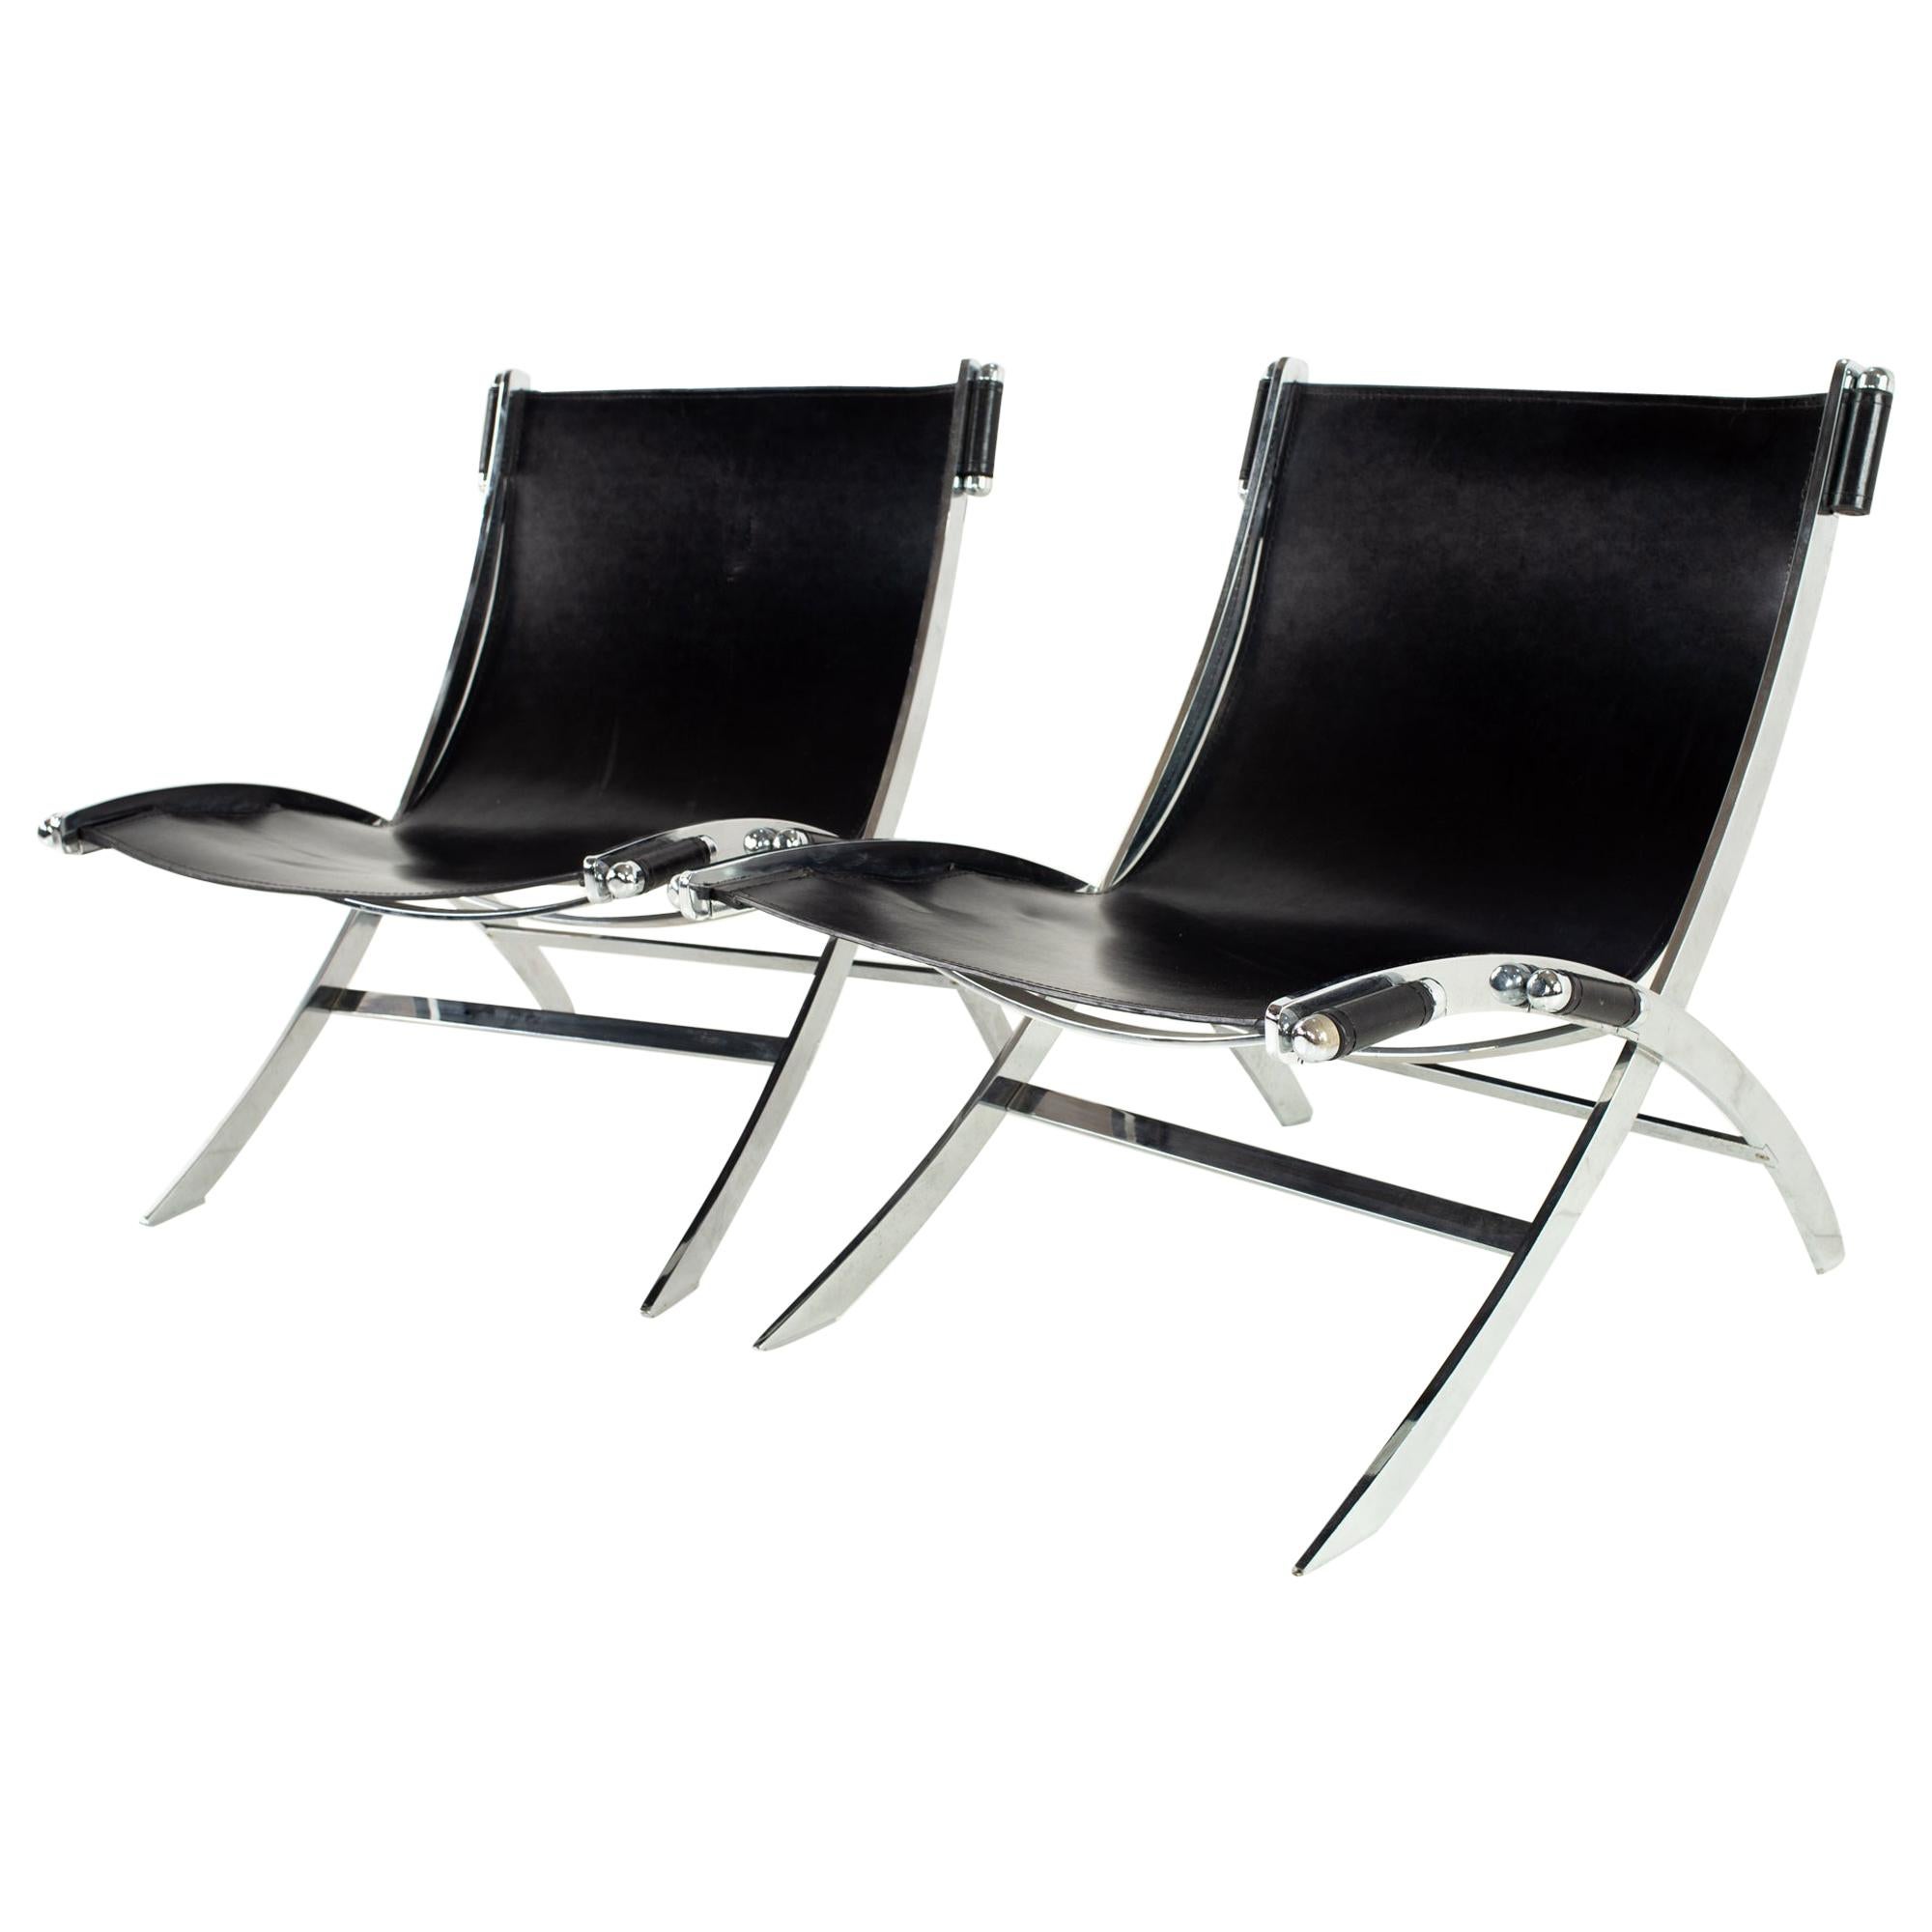 Paul Tuttle for Flexform Midcentury Black Leather and Chrome Lounge Chairs, Pair